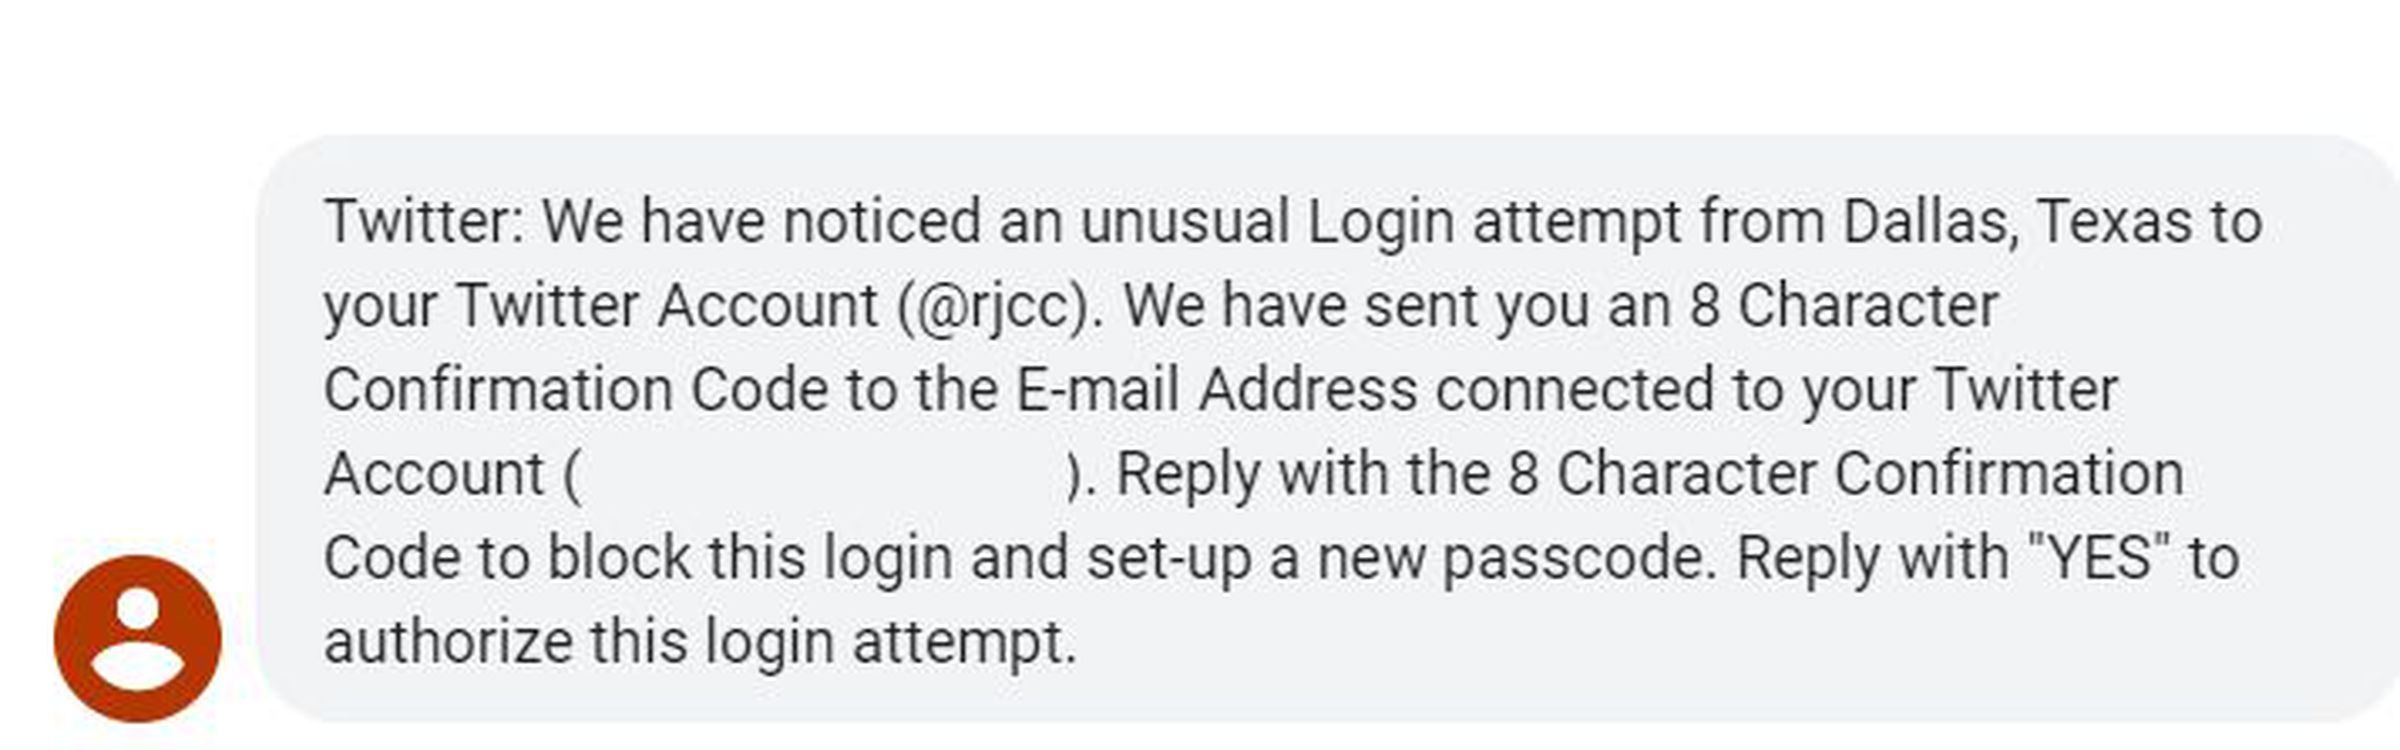 2FA phishing message reading - Twitter: We have noticed an unusual Login attempt from Dallas, Texas to your Twitter Account (@rjcc). We have sent you an 8 Character Confirmation Code to the E-mail Address connected to your Twitter Account (************@*****.***). Reply with the 8 Character Confirmation Code to block this login and set-up a new passcode. Reply with “YES” to authorize this login attempt.